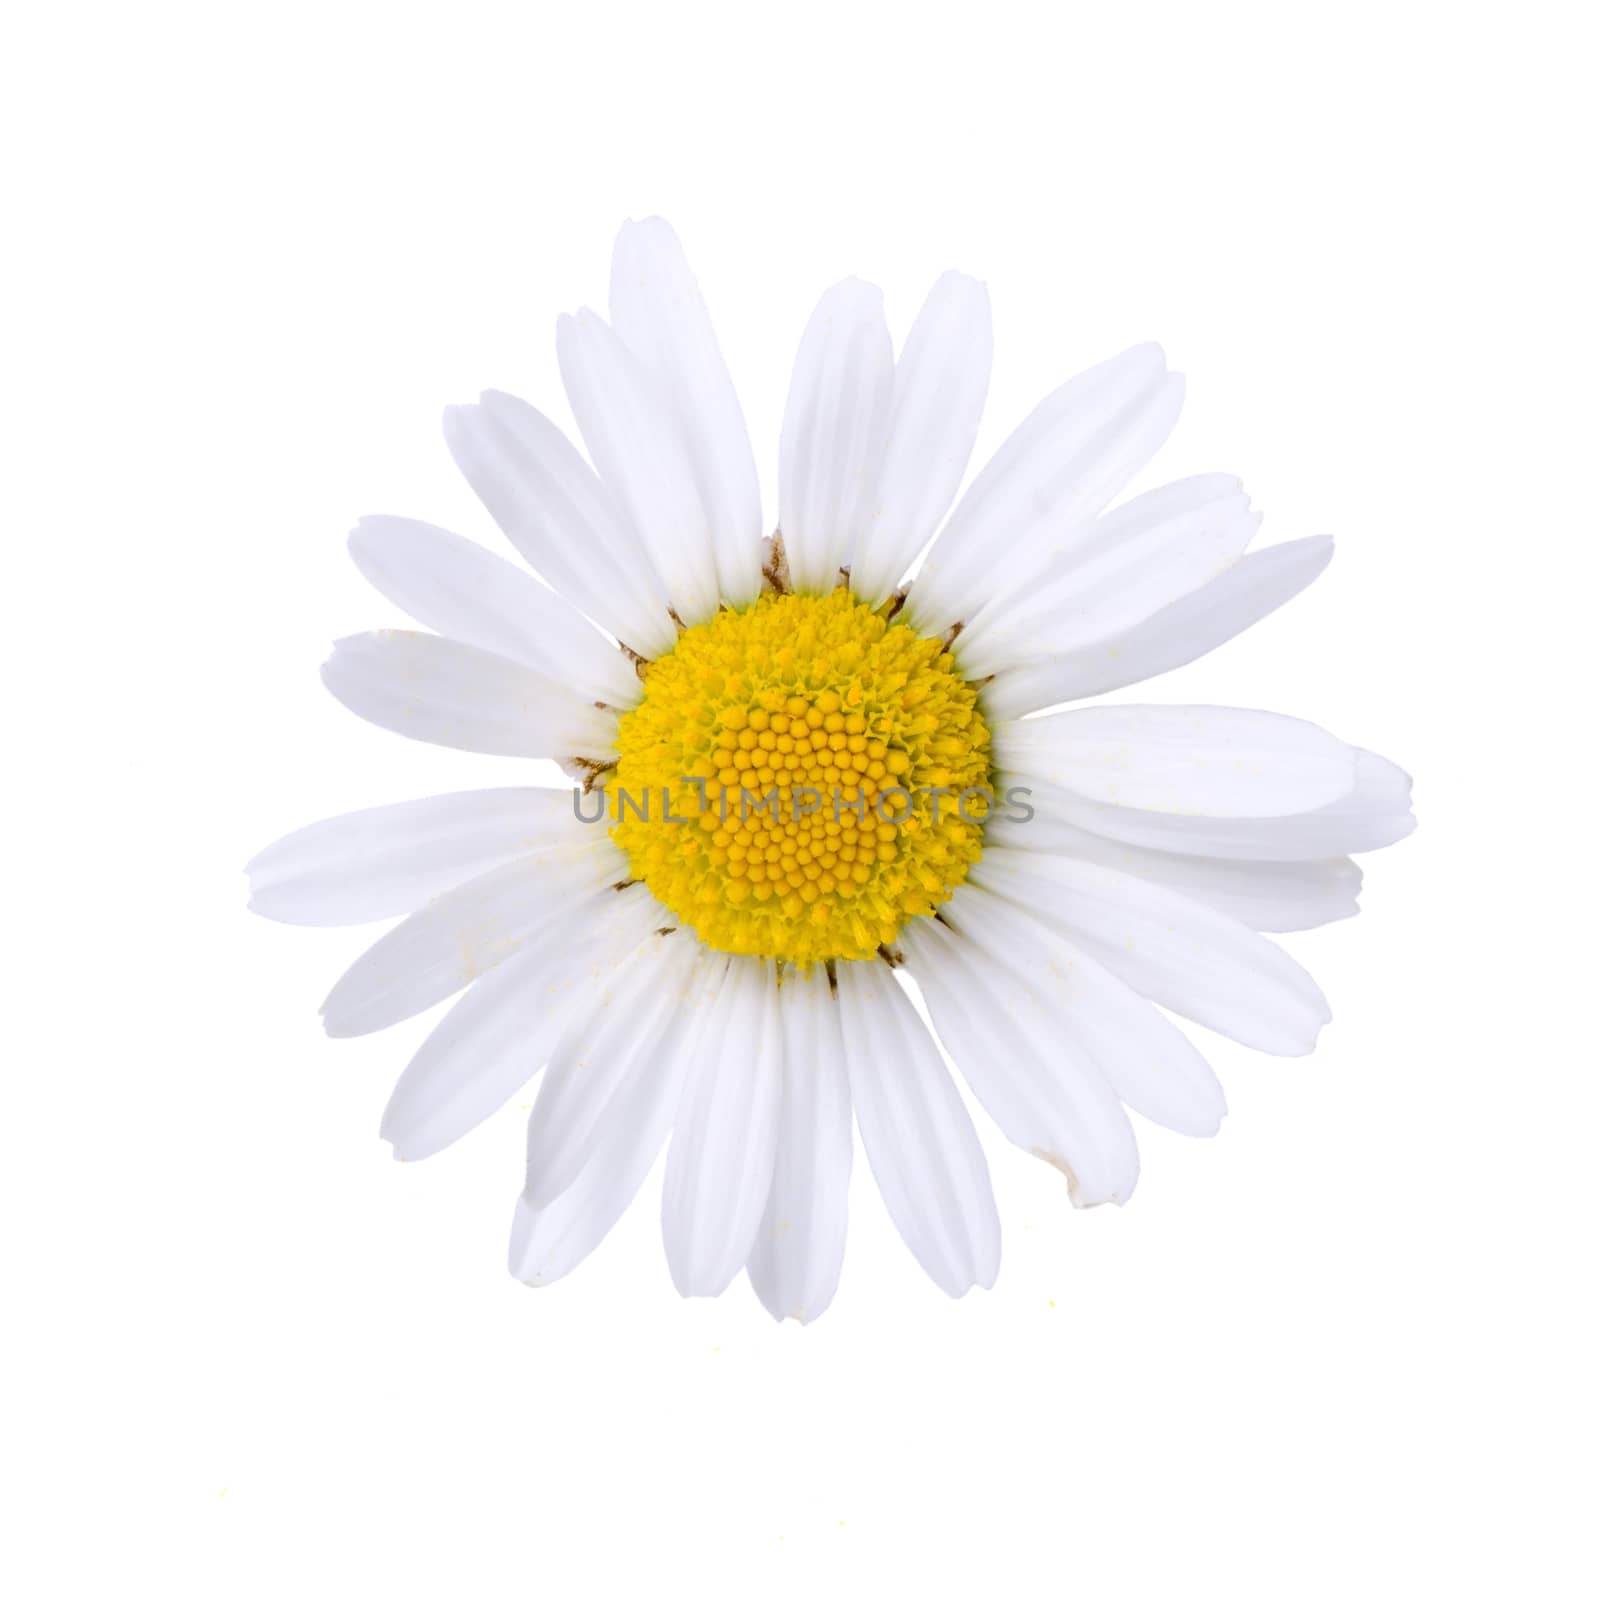 Oxeye daisy bloom isolated on white background.